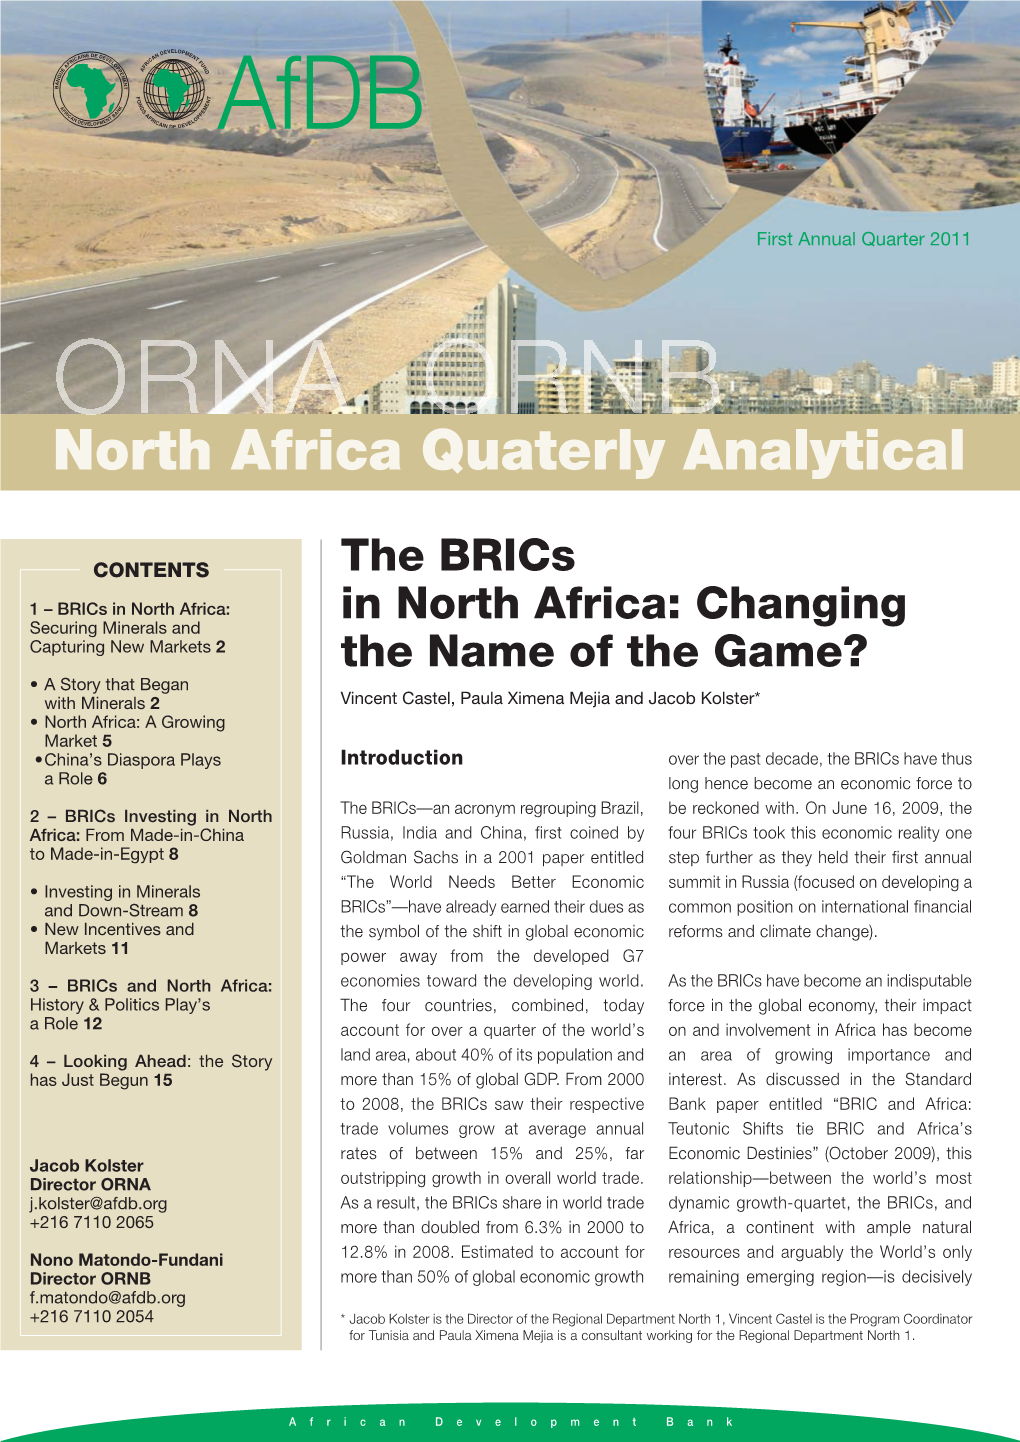 The Brics in North Africa: Changing the Name of the Game?